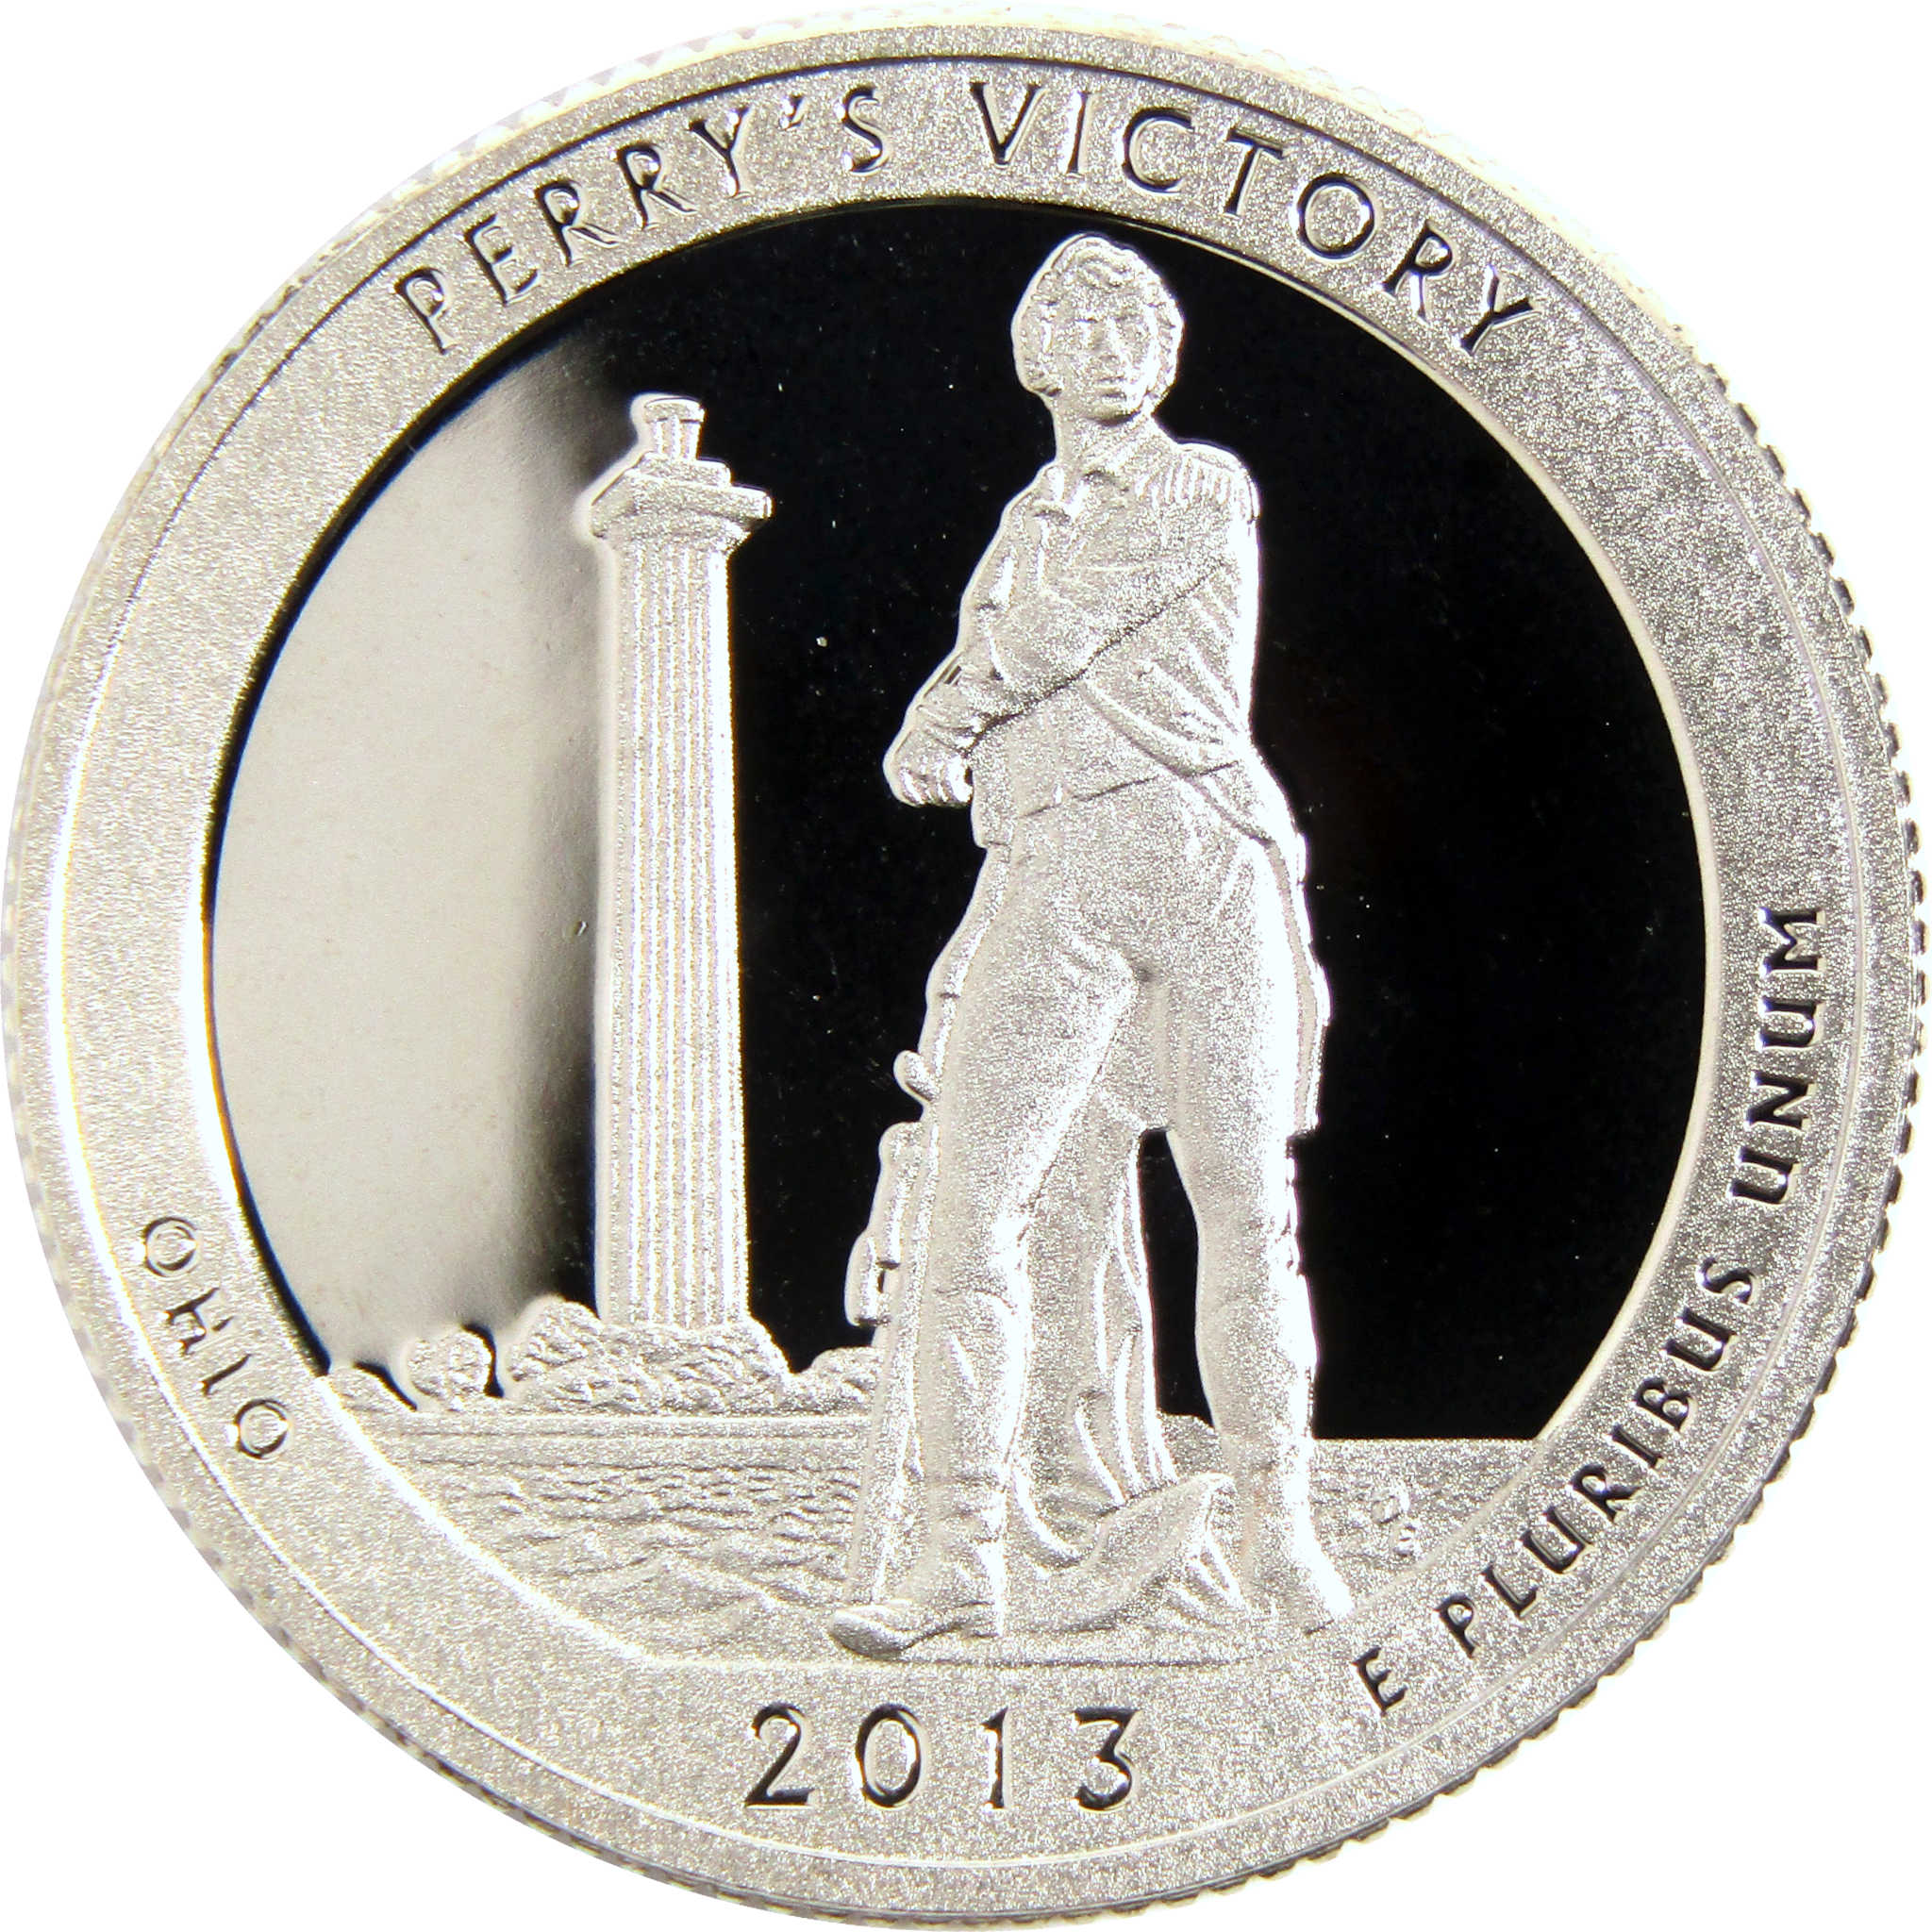 2013 S Perry's Victory National Park Quarter Clad 25c Proof Coin